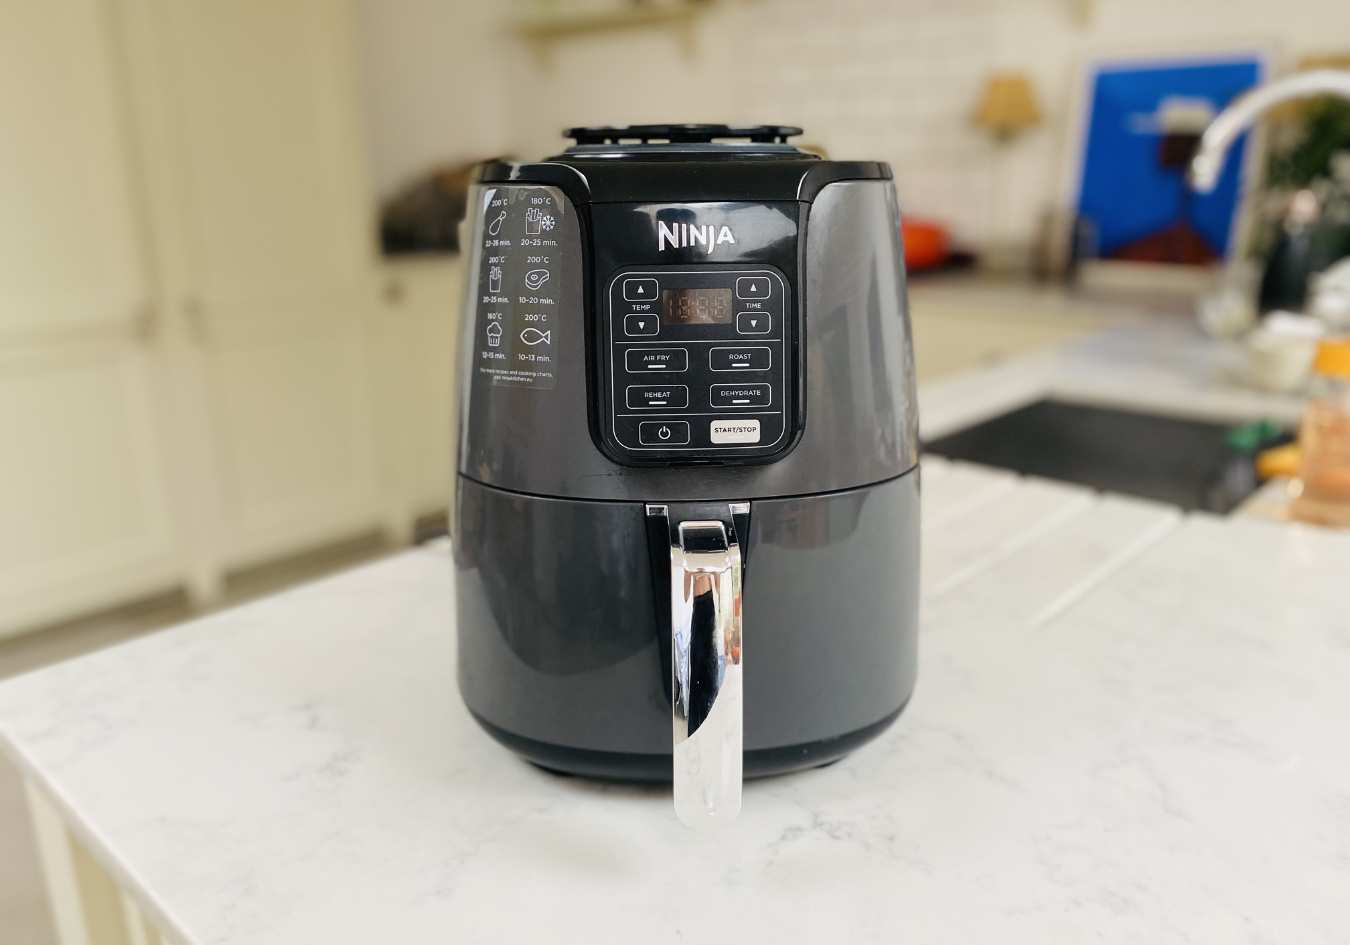 Ninja Air Fryer review: Is it worth buying?